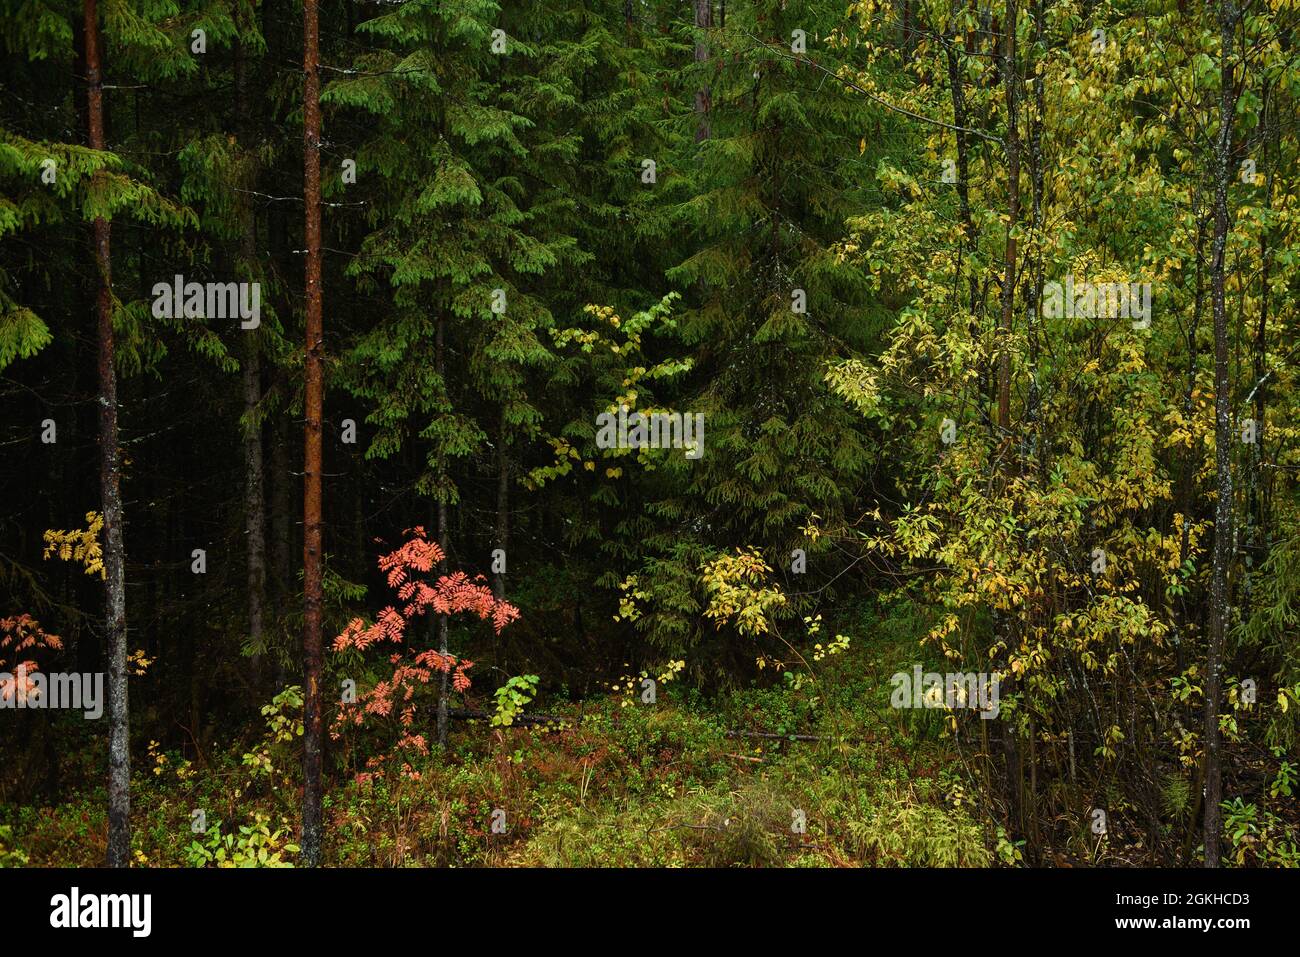 Colors of autumn. Landscape. Mixed forest. Colorful leaves and herbs in early autumn. Stock Photo